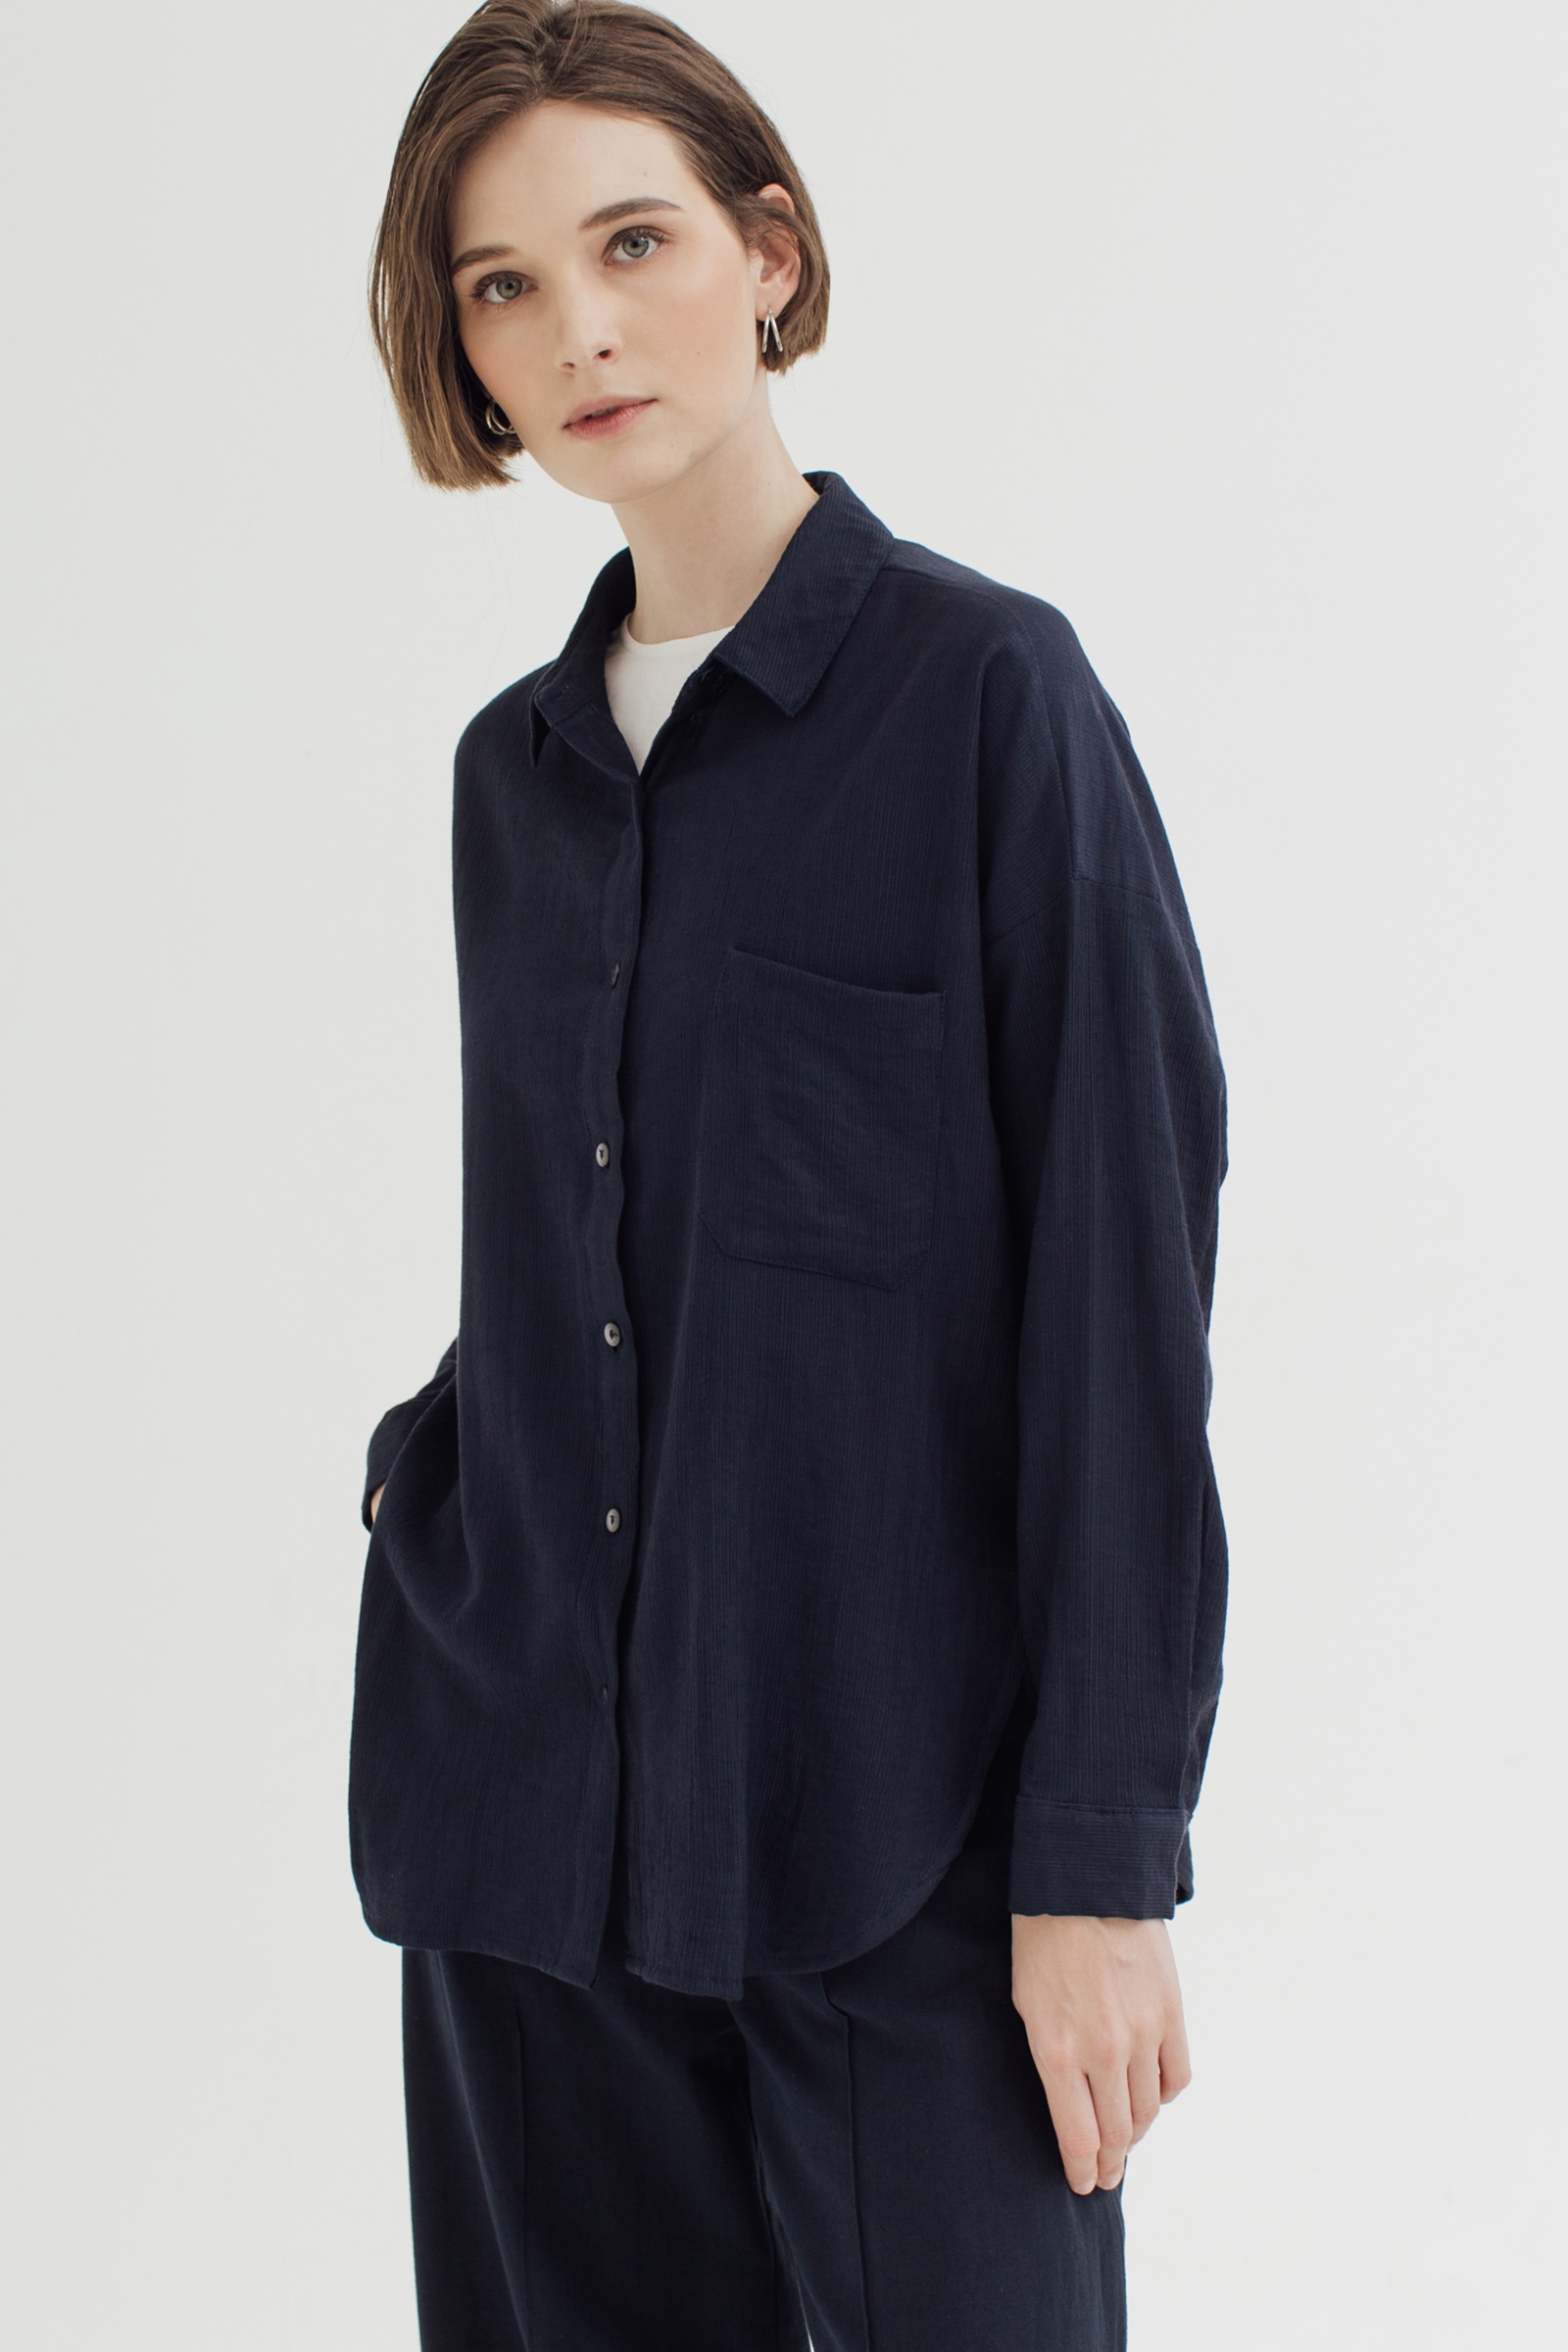 Picture of Madeline Shirt Navy